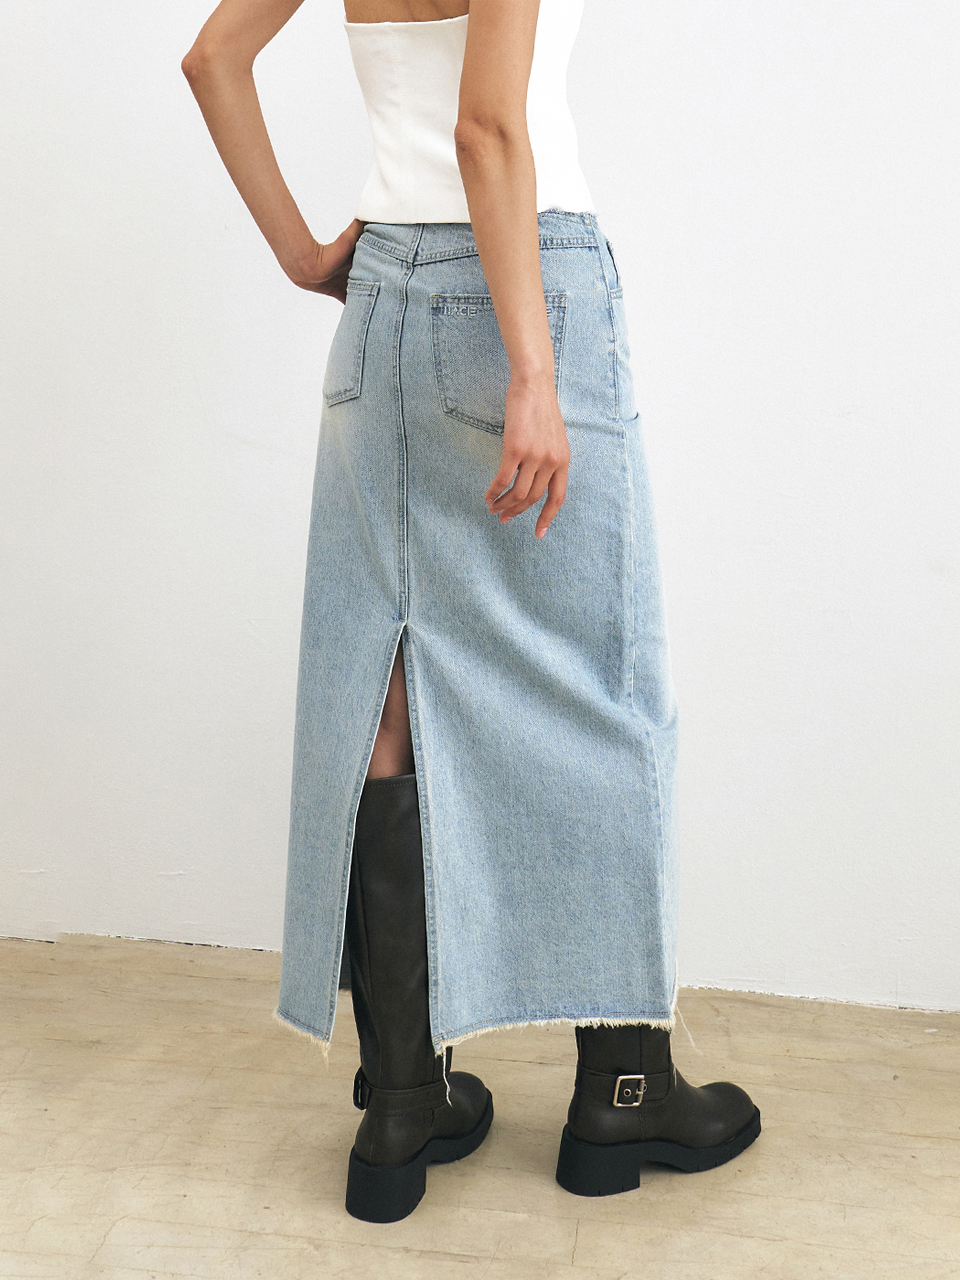 HACIE - LOW-RISE EMBROIDERY DENIM SKIRT [LIGHT BLUE]